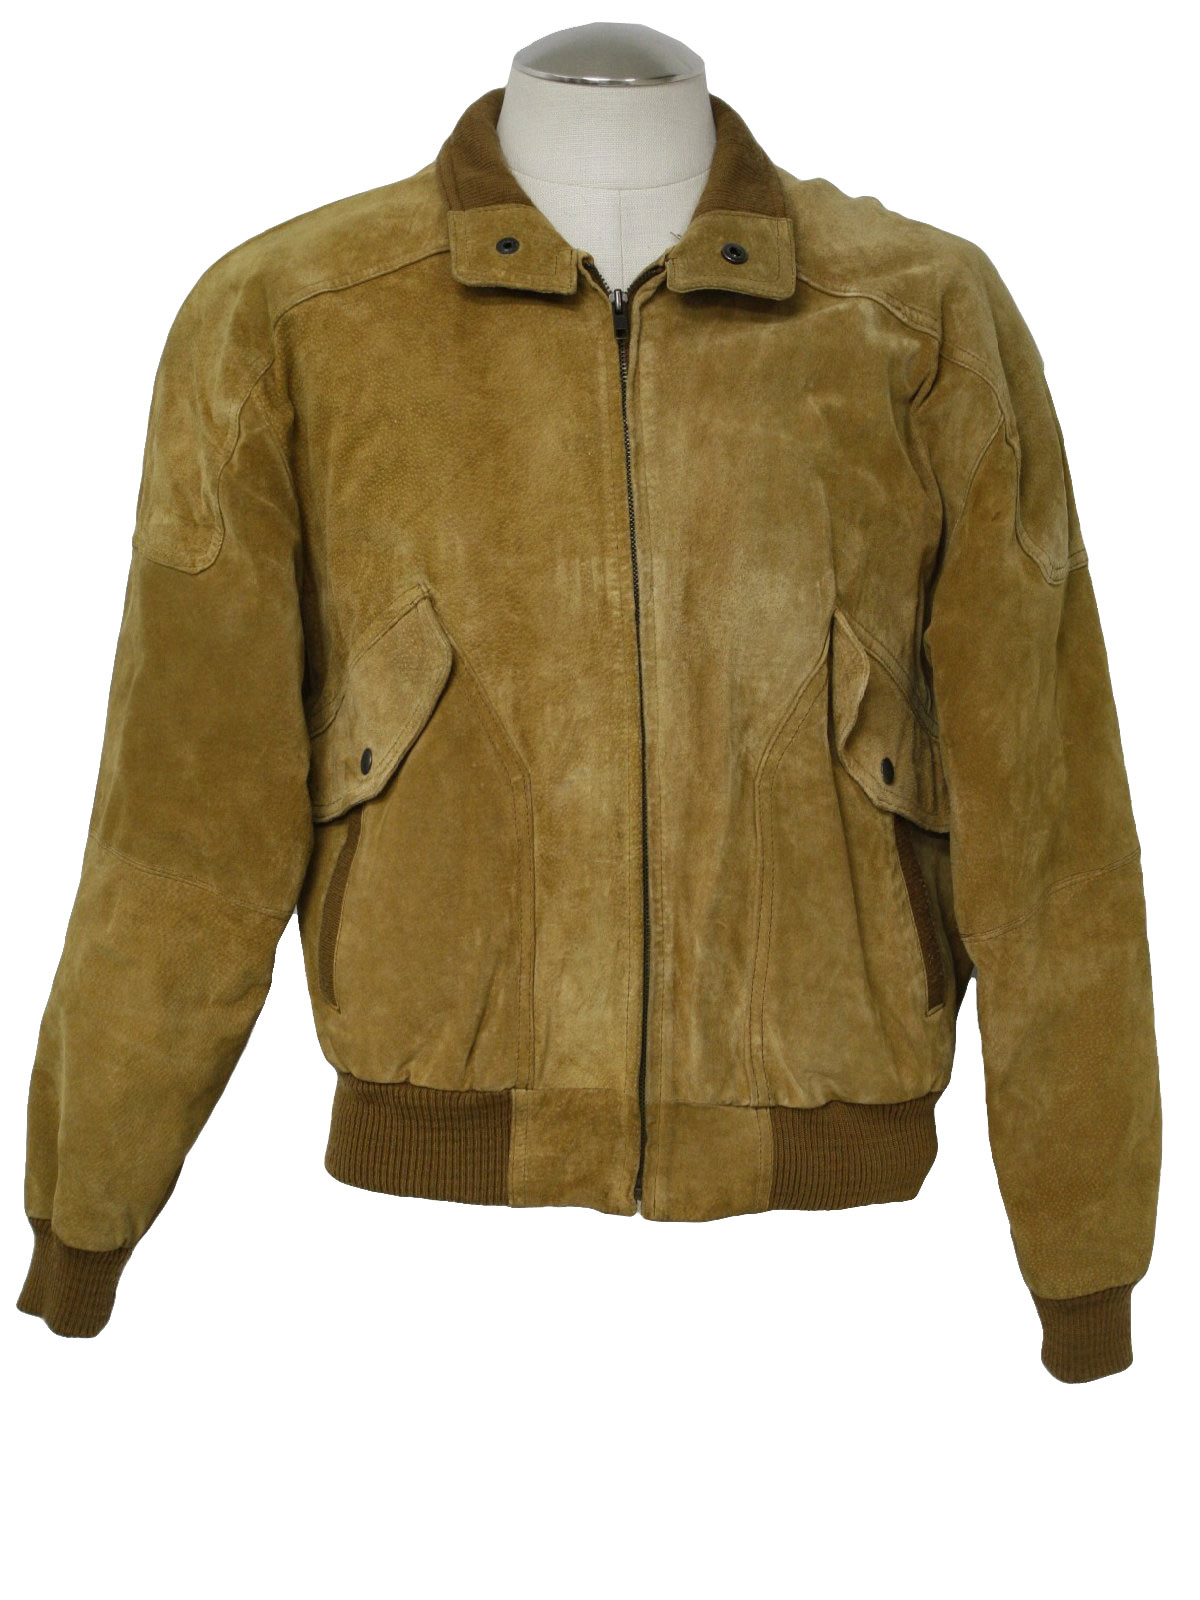 Vintage 80s Leather Jacket: 80s -Members only- Mens camel brown suede ...